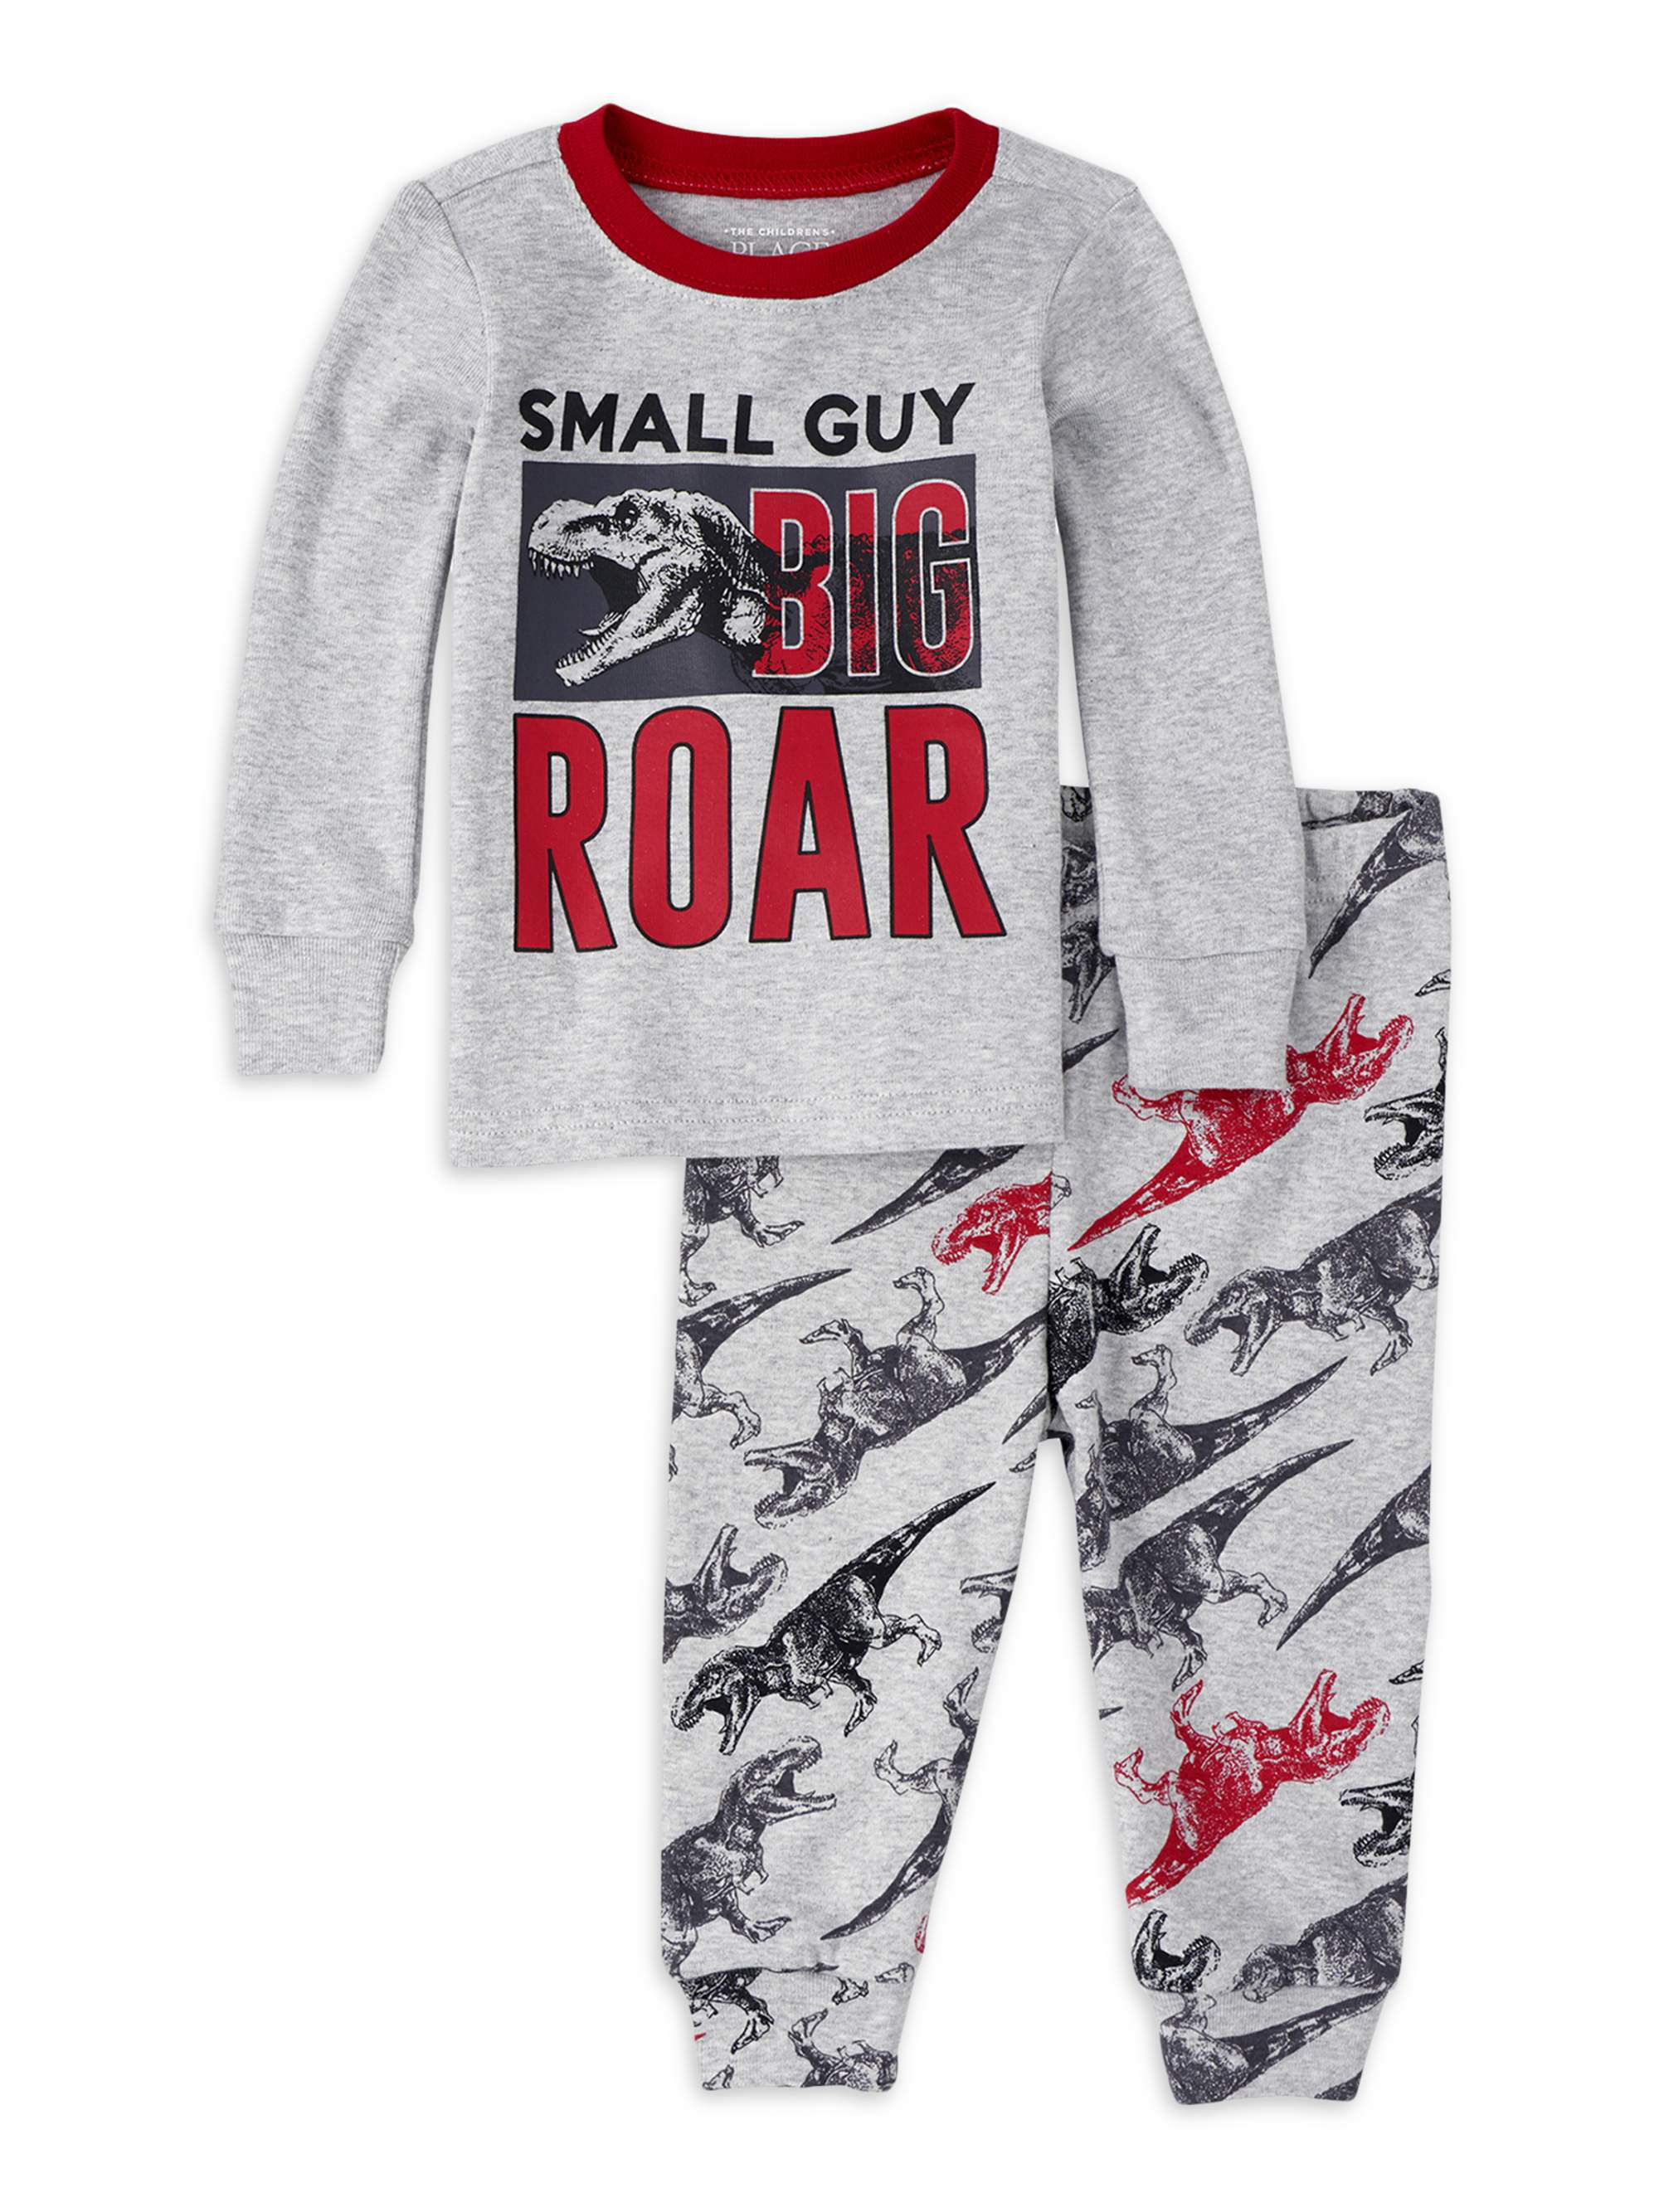 The Childrens Place Baby and Toddler Boys Camo Snug Fit Cotton Pajamas